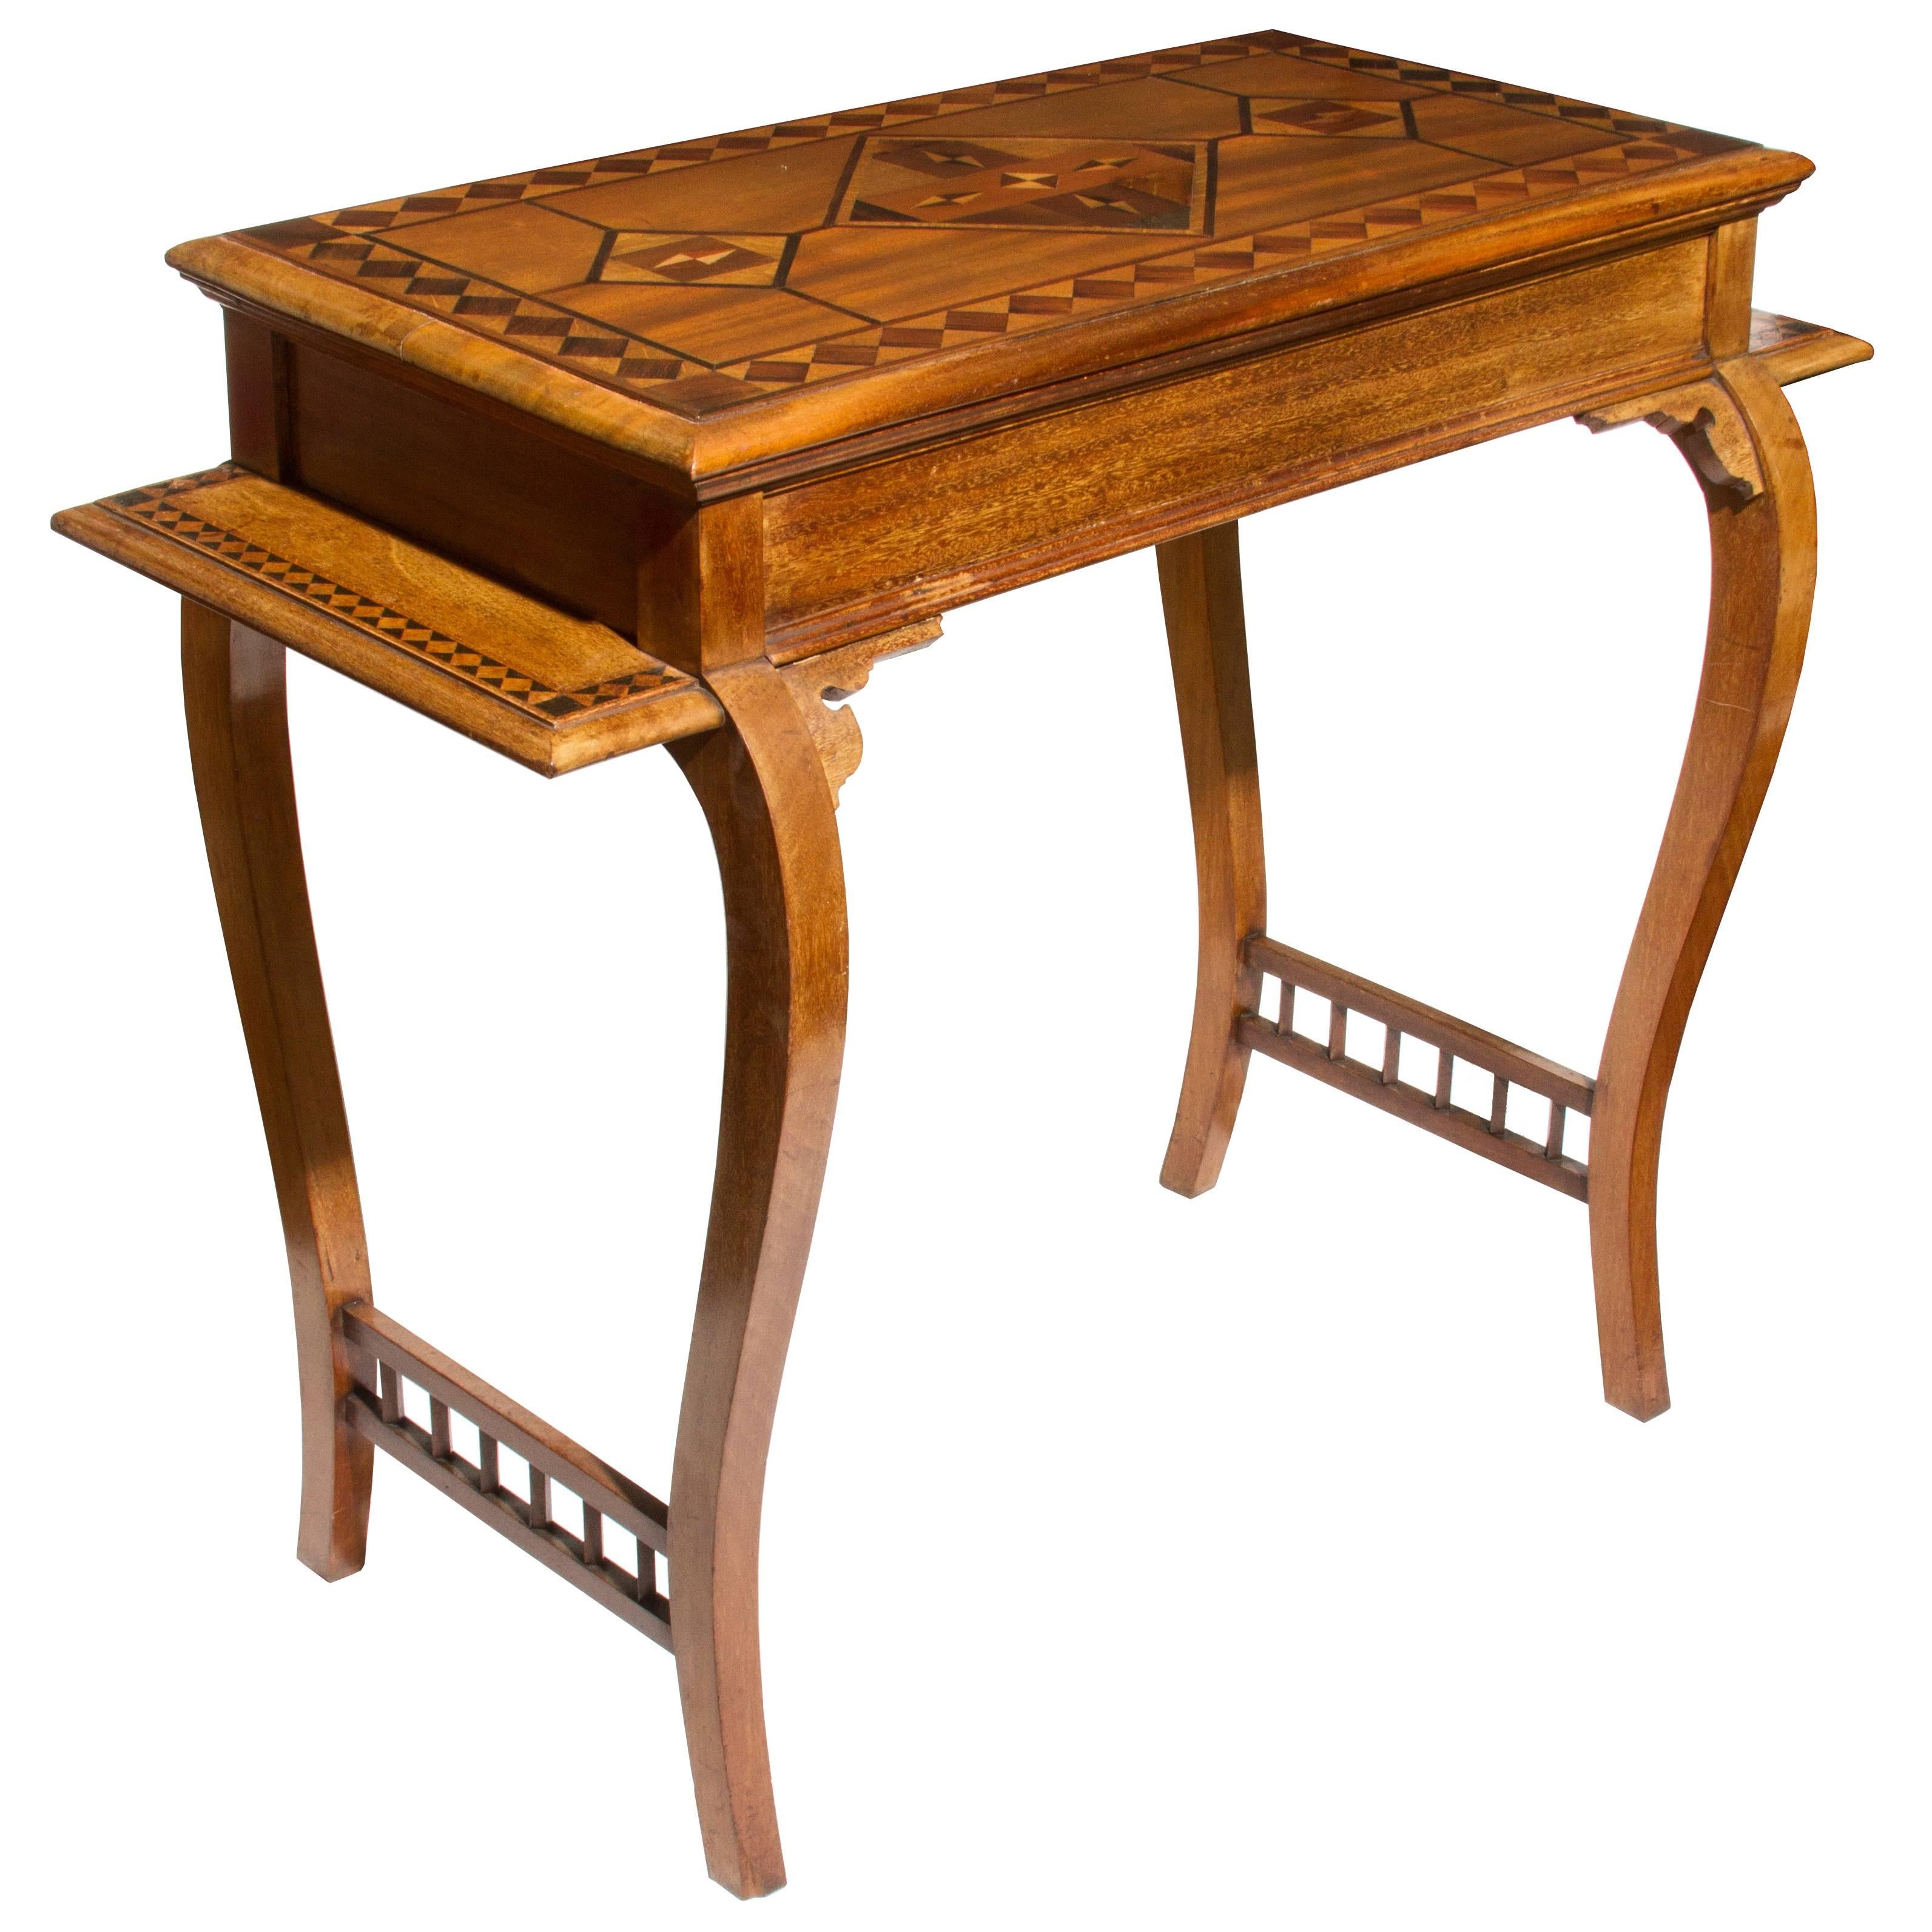 Folk Art Inlaid Wooden Table For Sale